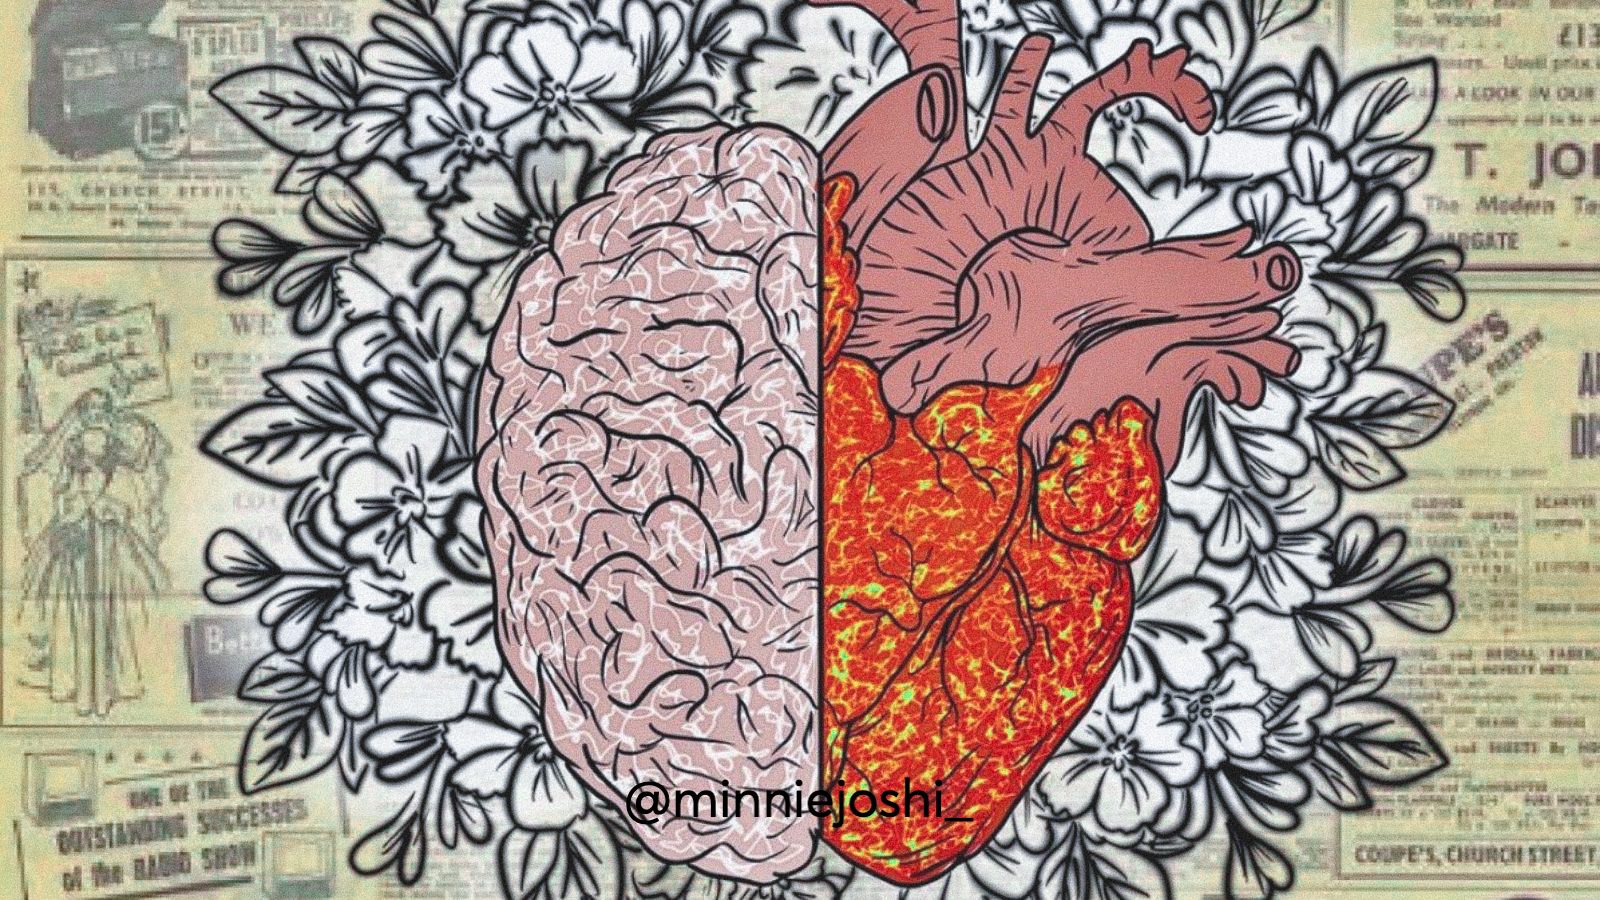 An illustration of a brain and a heart, merged into one.